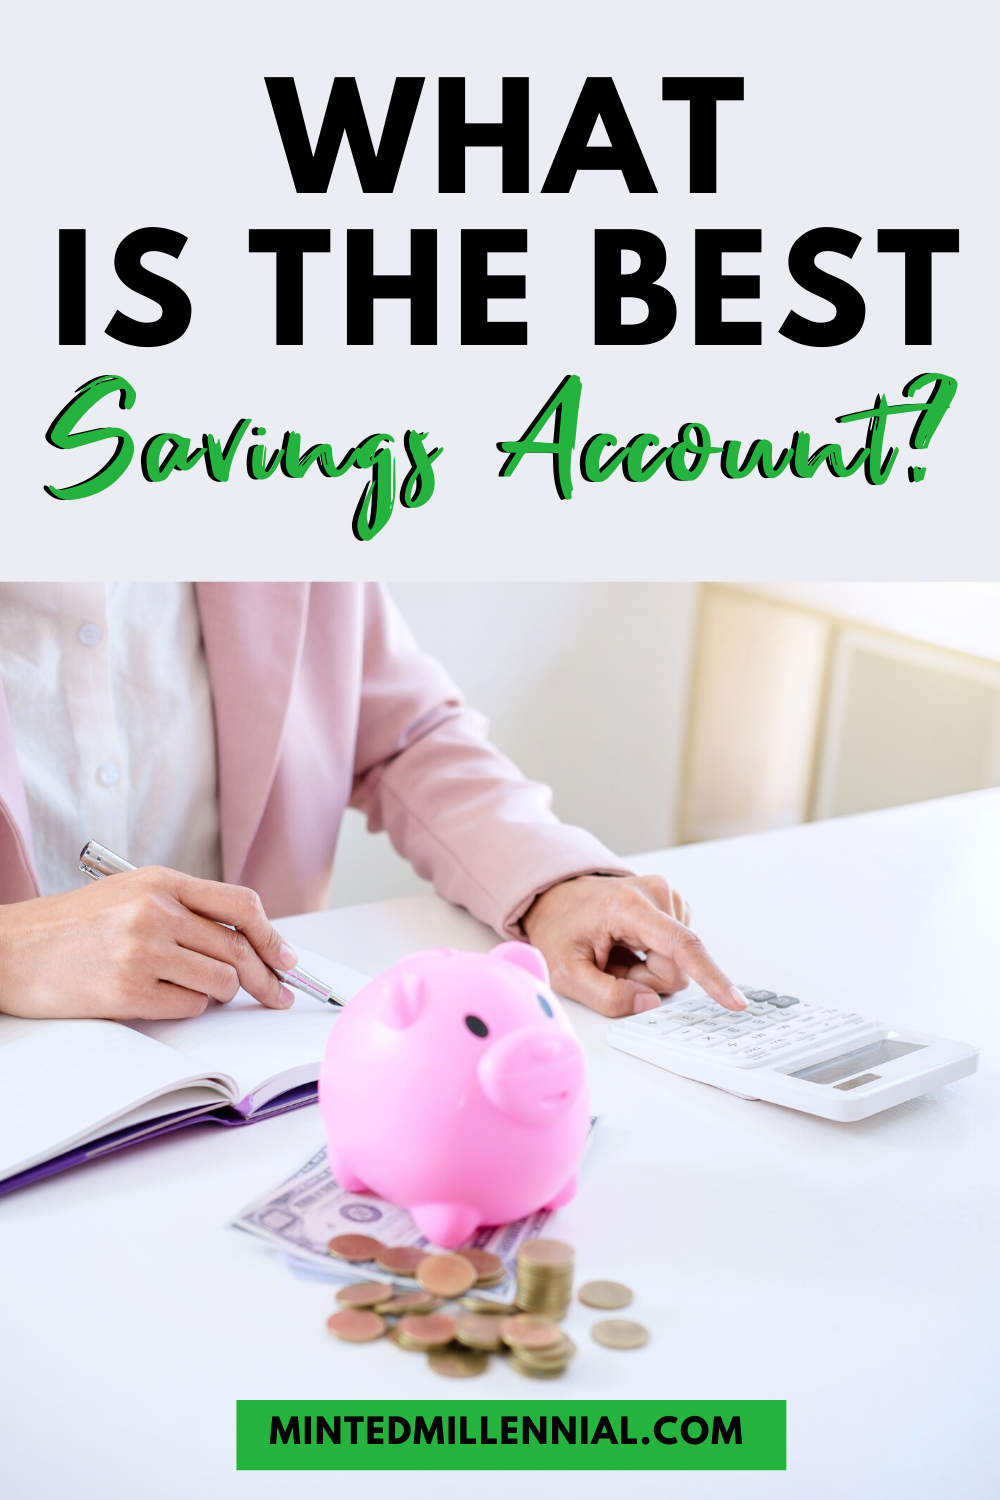 What Is The Best Savings Account?